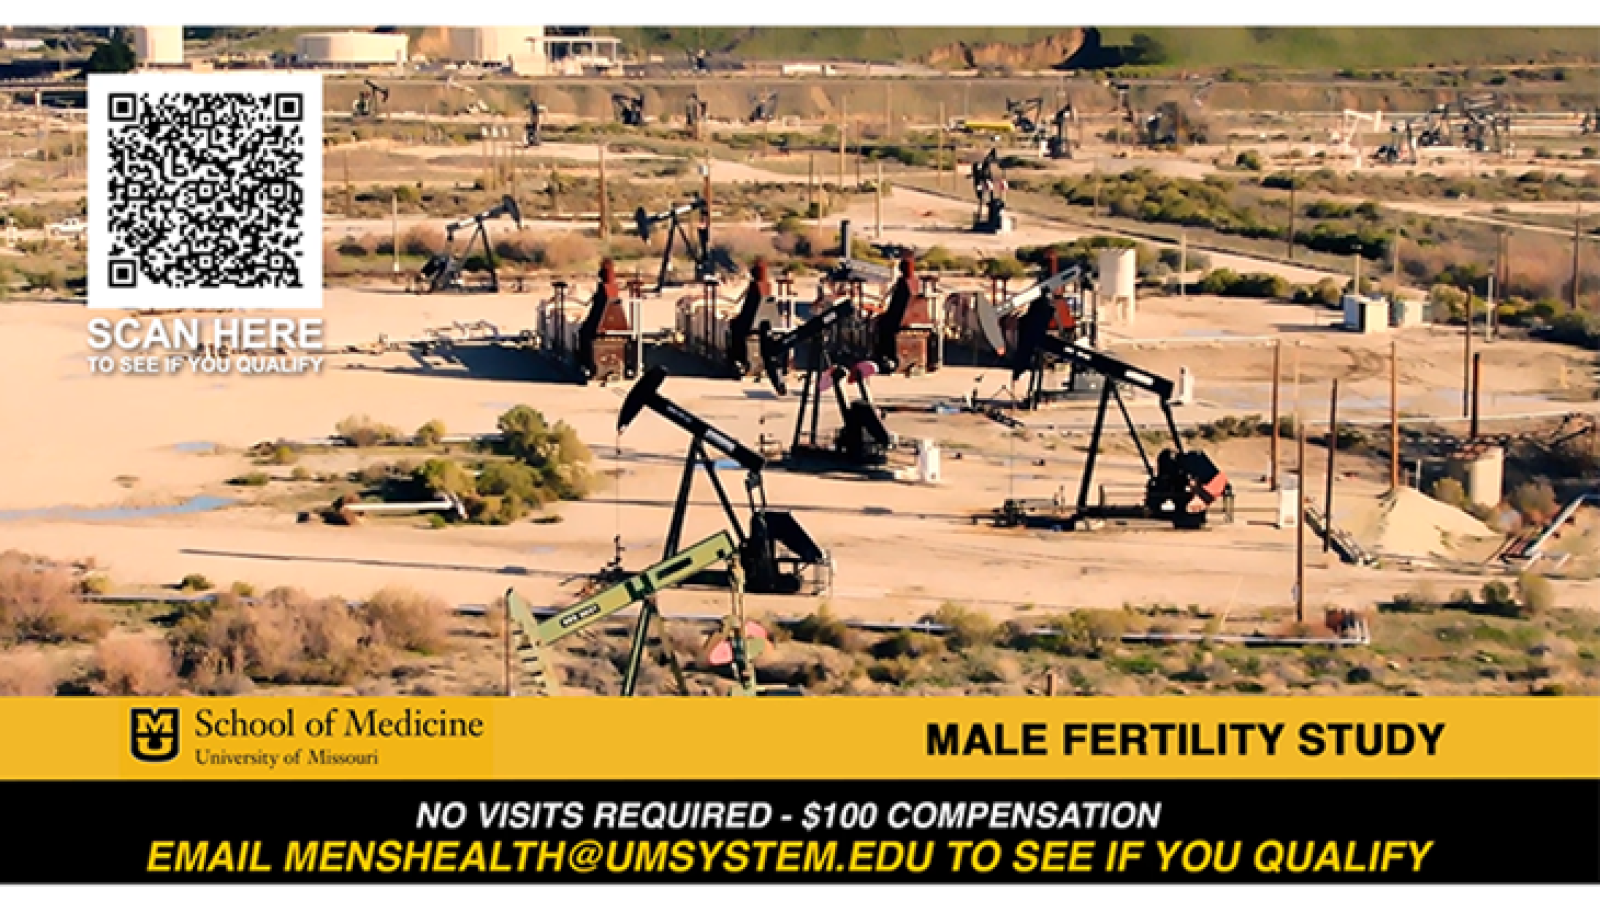 Research study to understand the effect of fracking on male fertility.